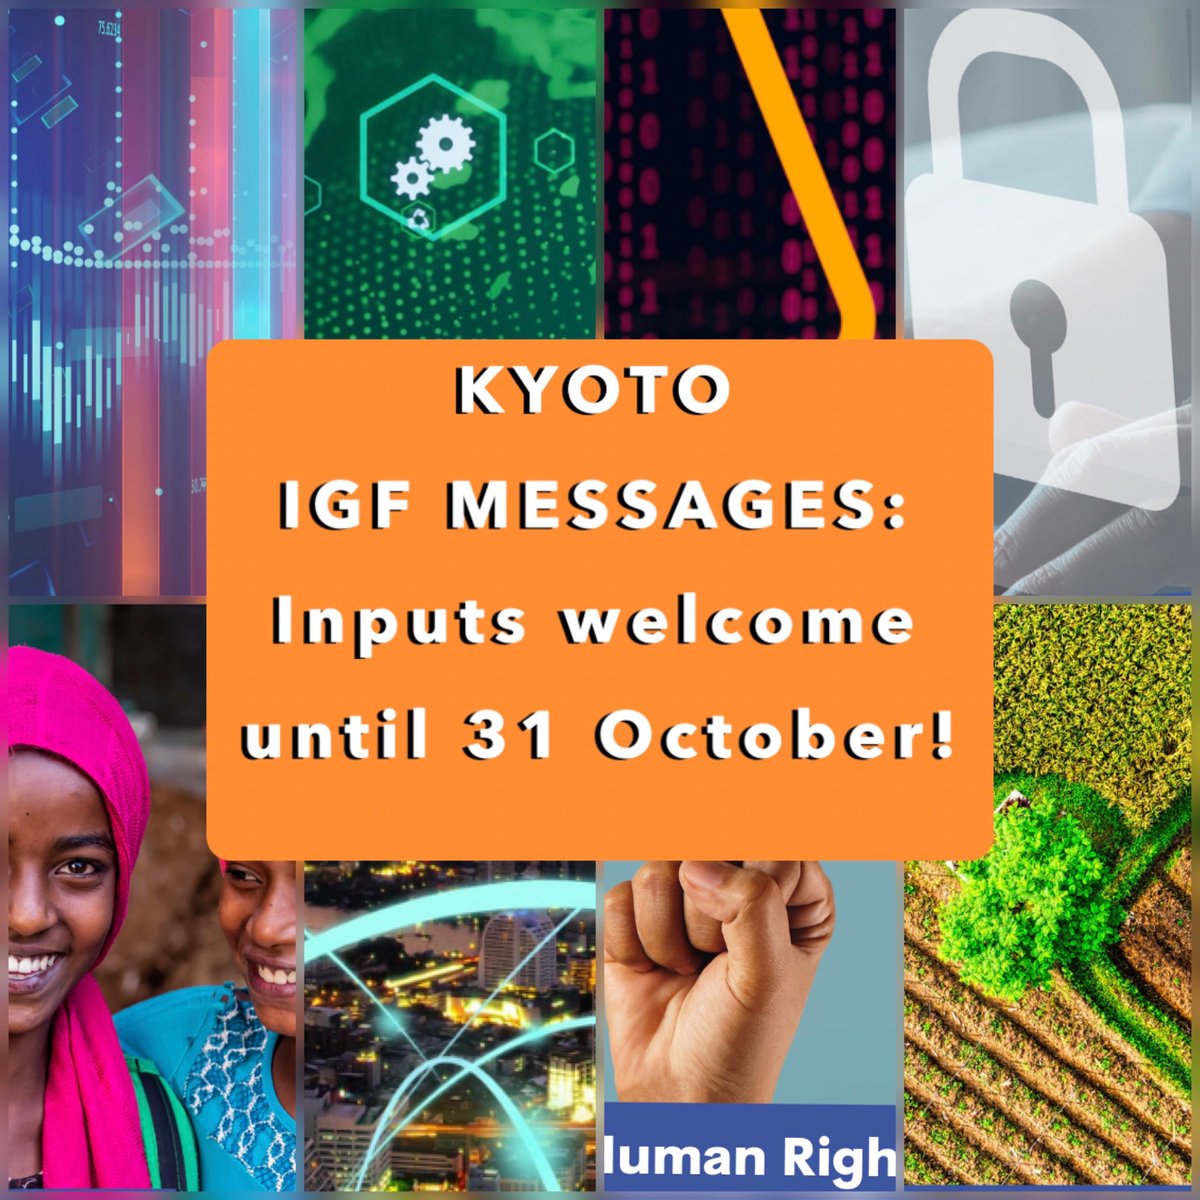 #IGF2023 focused on critical topics like #AI, Global #DigitalCooperation & Digital Rights. See what the thousands of stakeholders who participated had to say about these & more in the Kyoto IGF Messages - OPEN FOR FEEDBACK at igf@un.org until 31 Oct! 👉 bit.ly/3tIRkpa